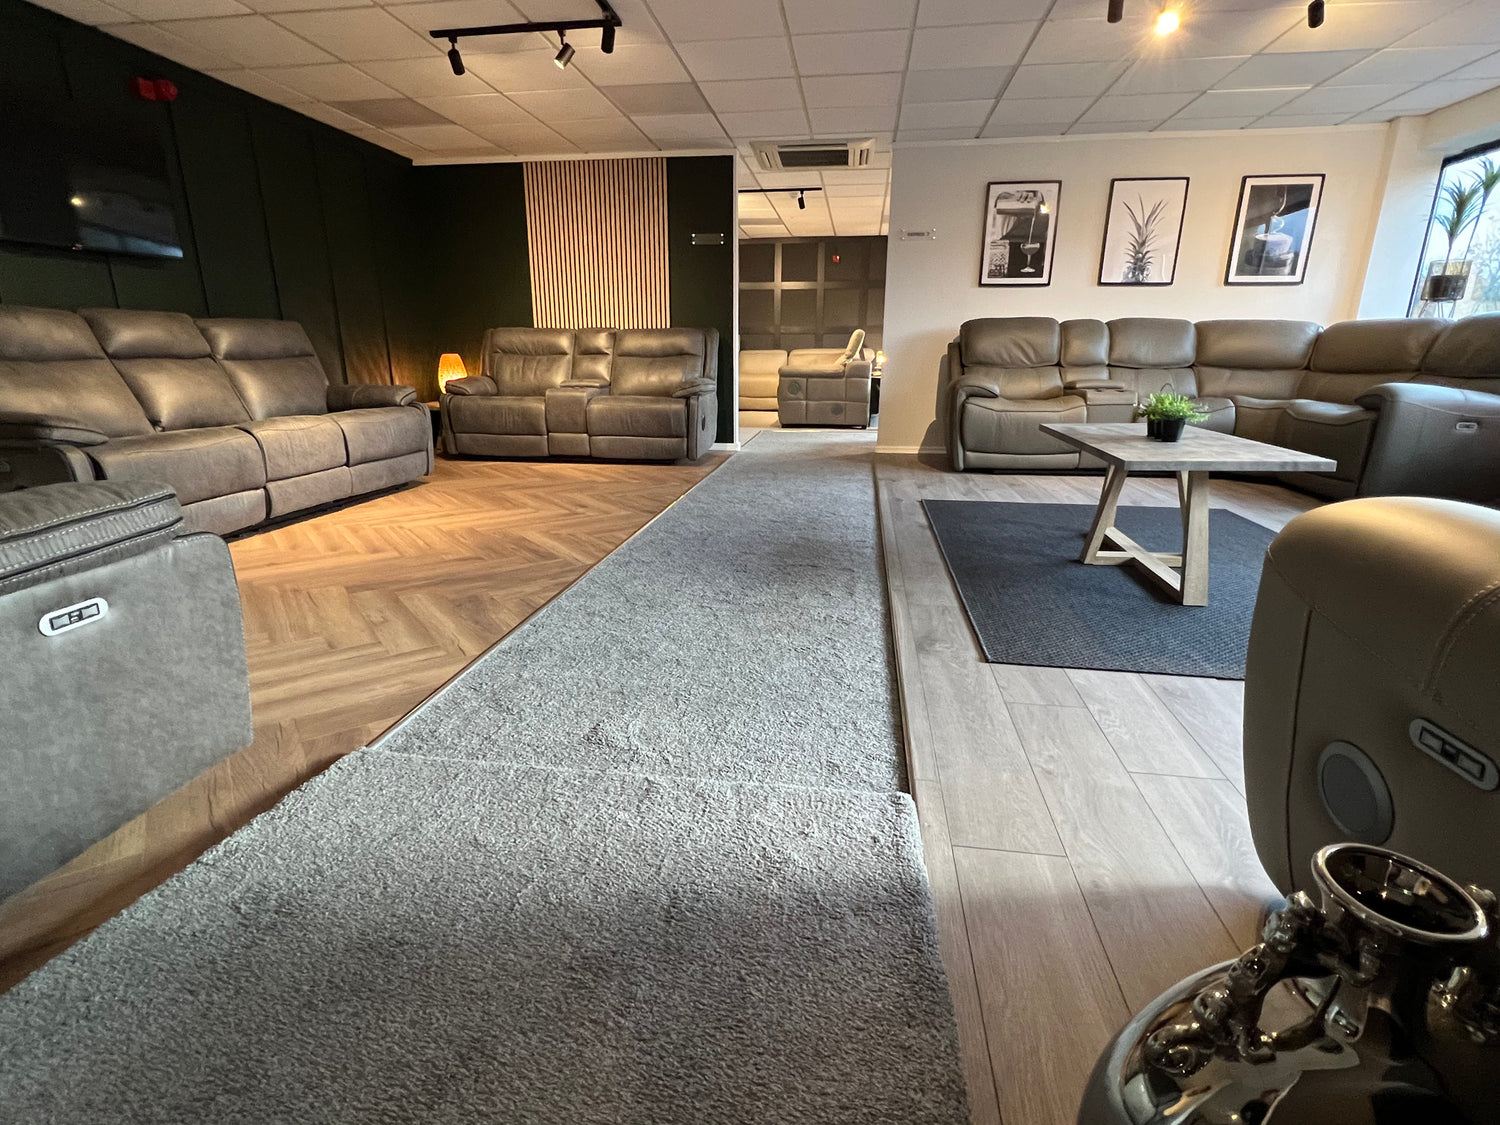 View our vast range of smart electric recliner sofas at our sofa shop in Gloucester.